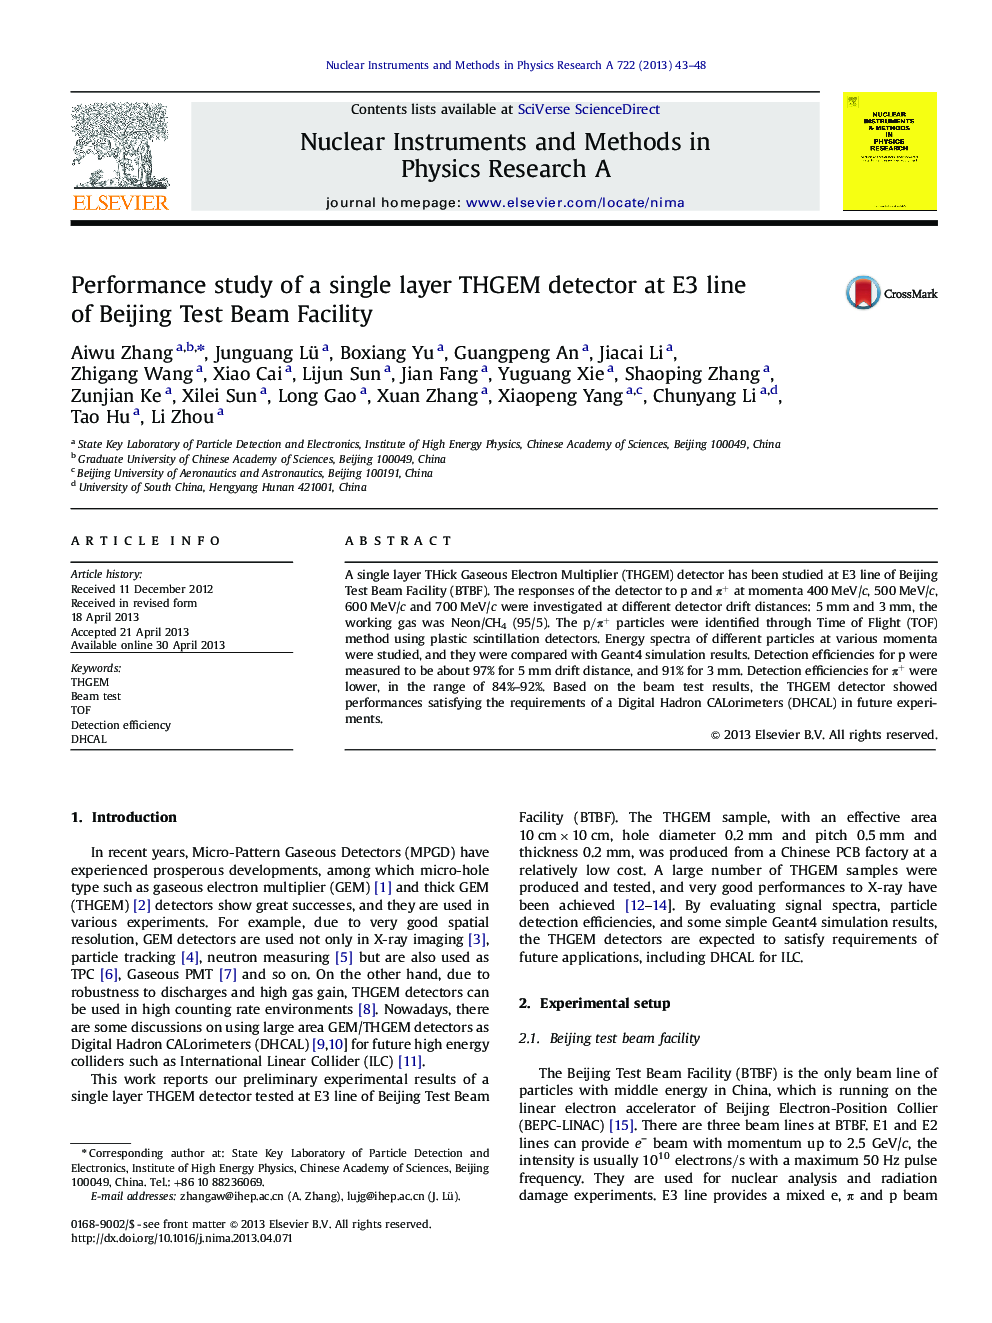 Performance study of a single layer THGEM detector at E3 line of Beijing Test Beam Facility